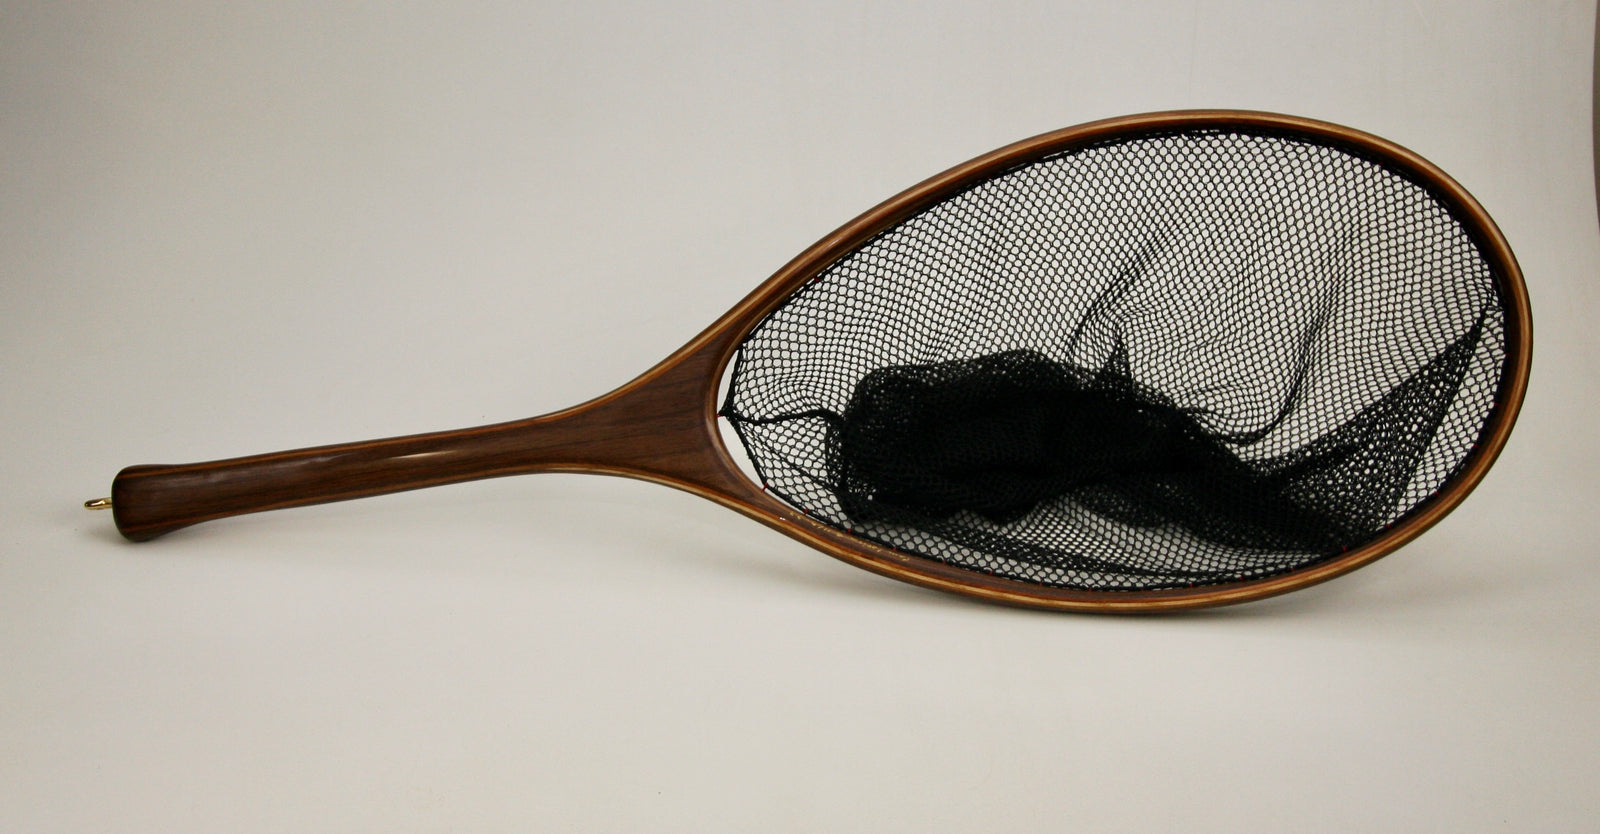 Products - Nets that Honor the Fish